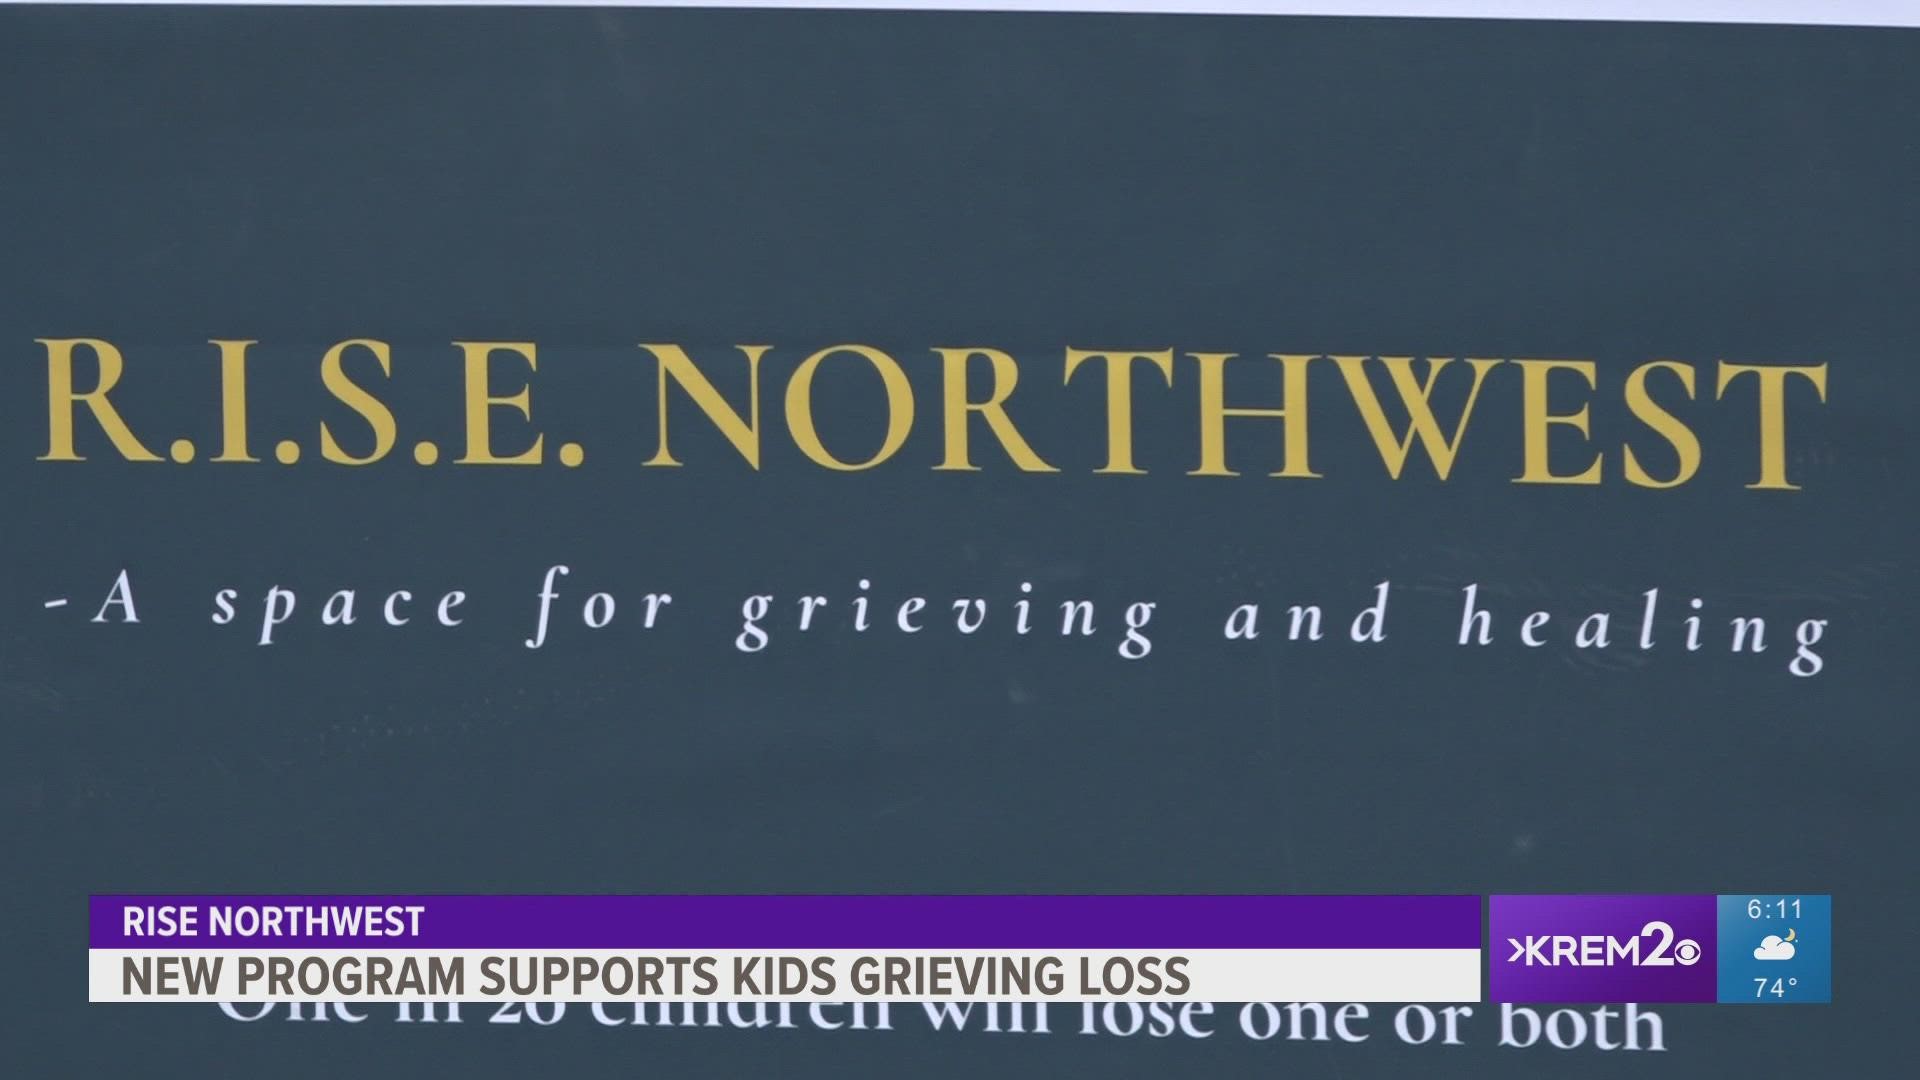 RISE Northwest offers clinical services and mentoring opportunities for those who've lost a parent.